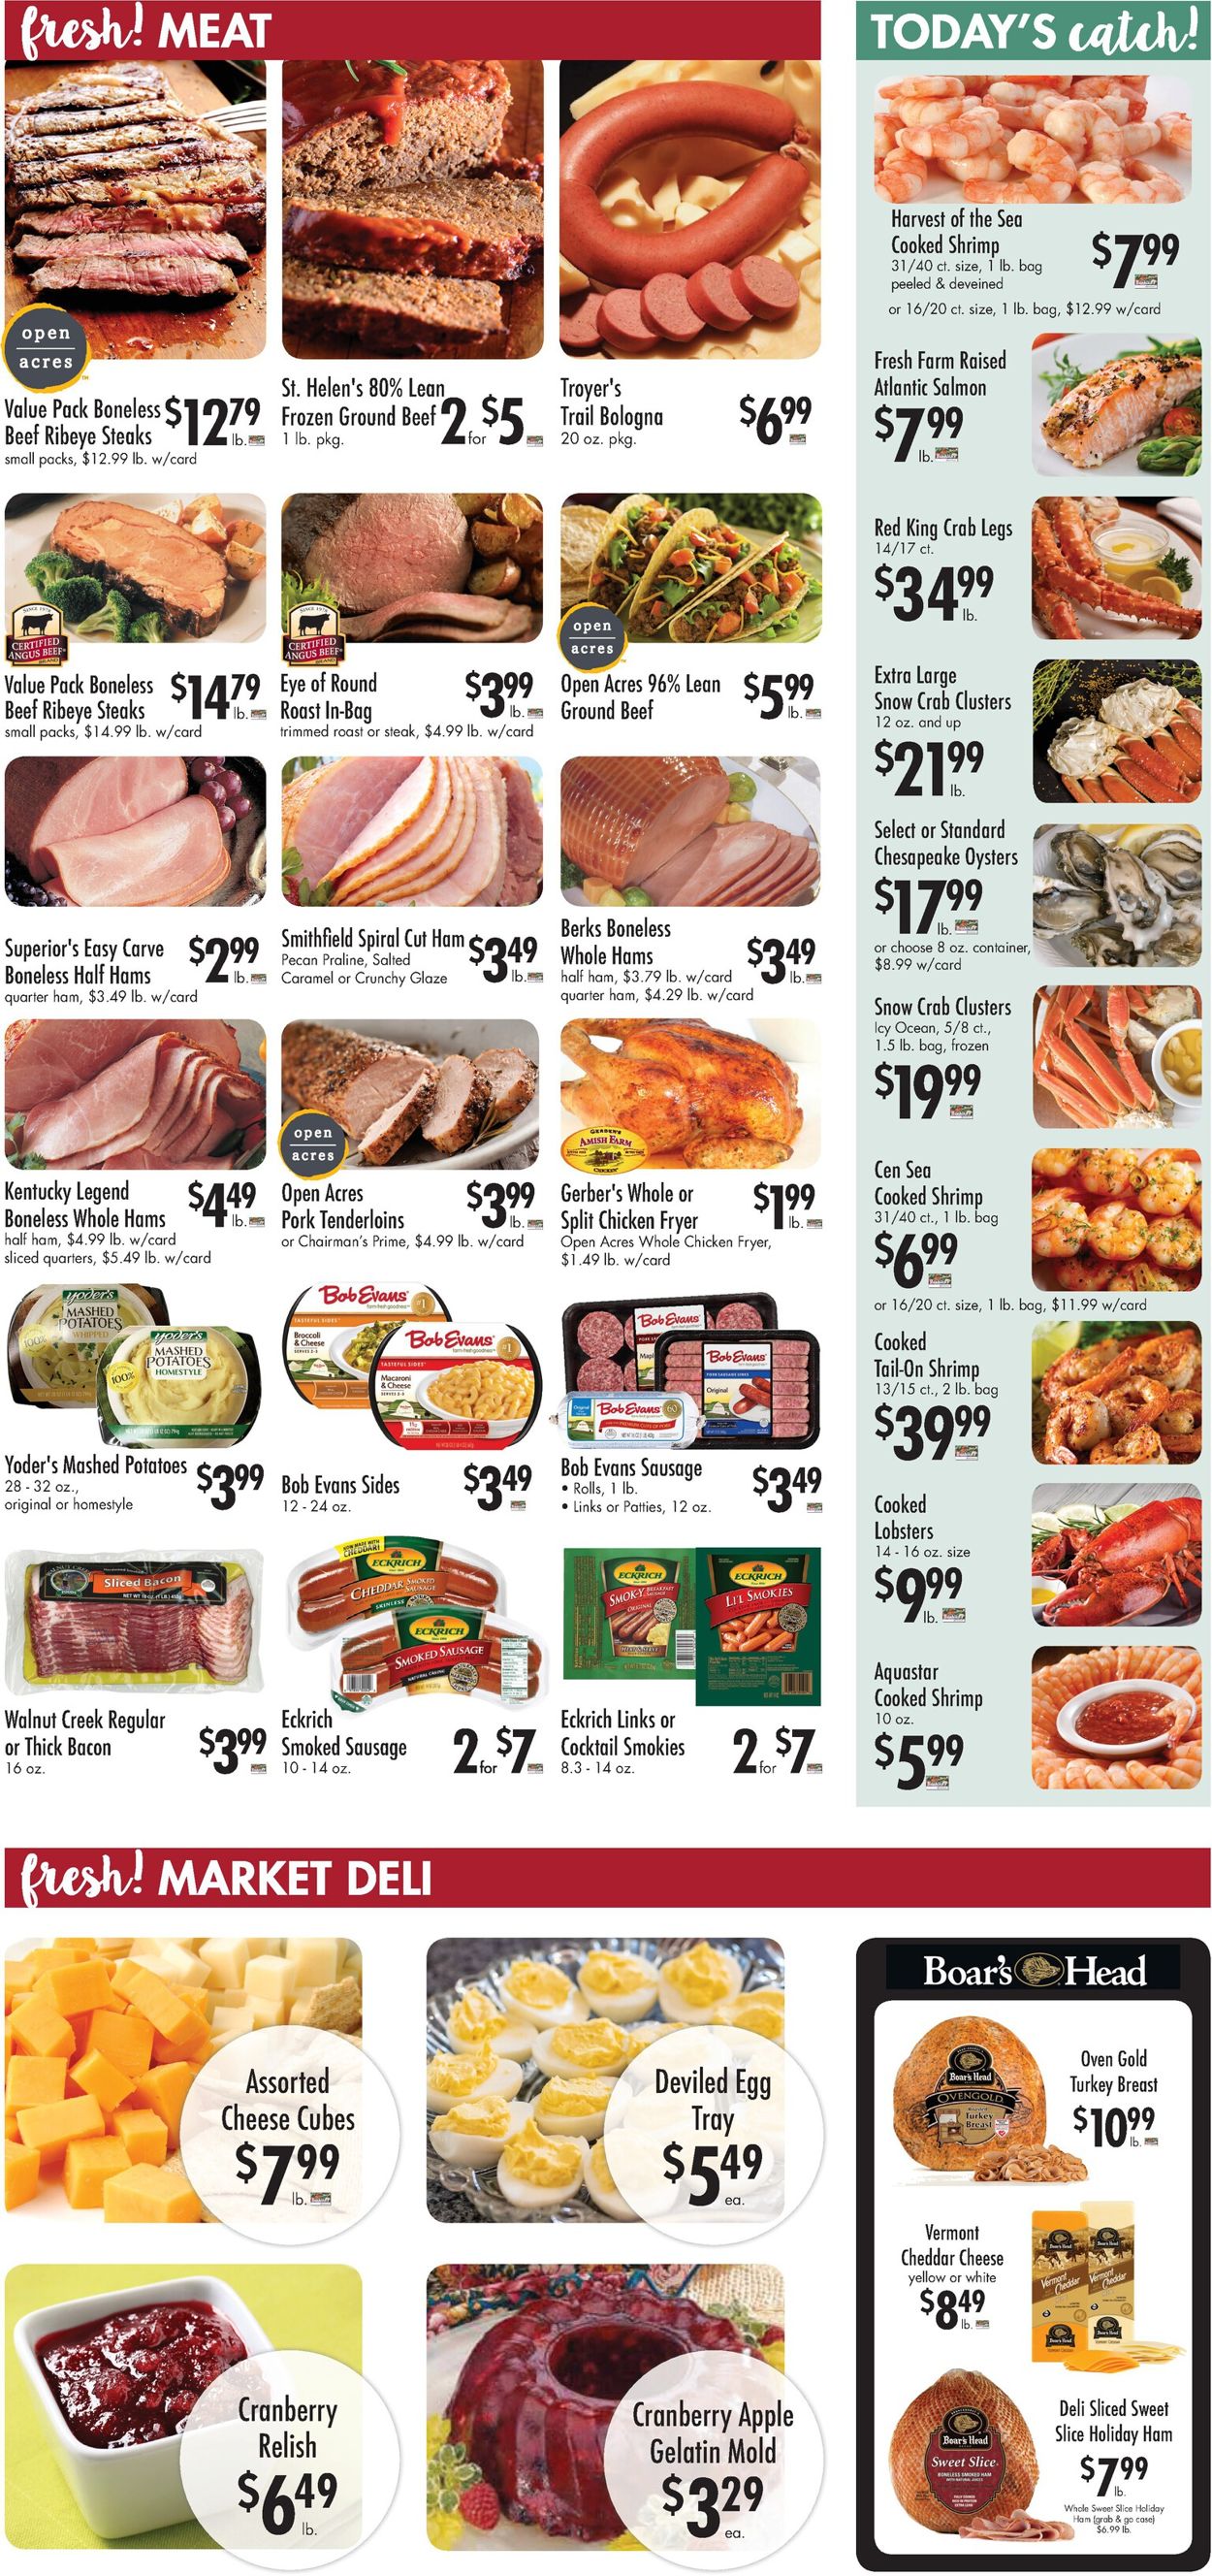 Buehler's Fresh Foods Thanksgiving 2020 Ad Weekly Ad Circular - valid 11/18-11/26/2020 (Page 2)